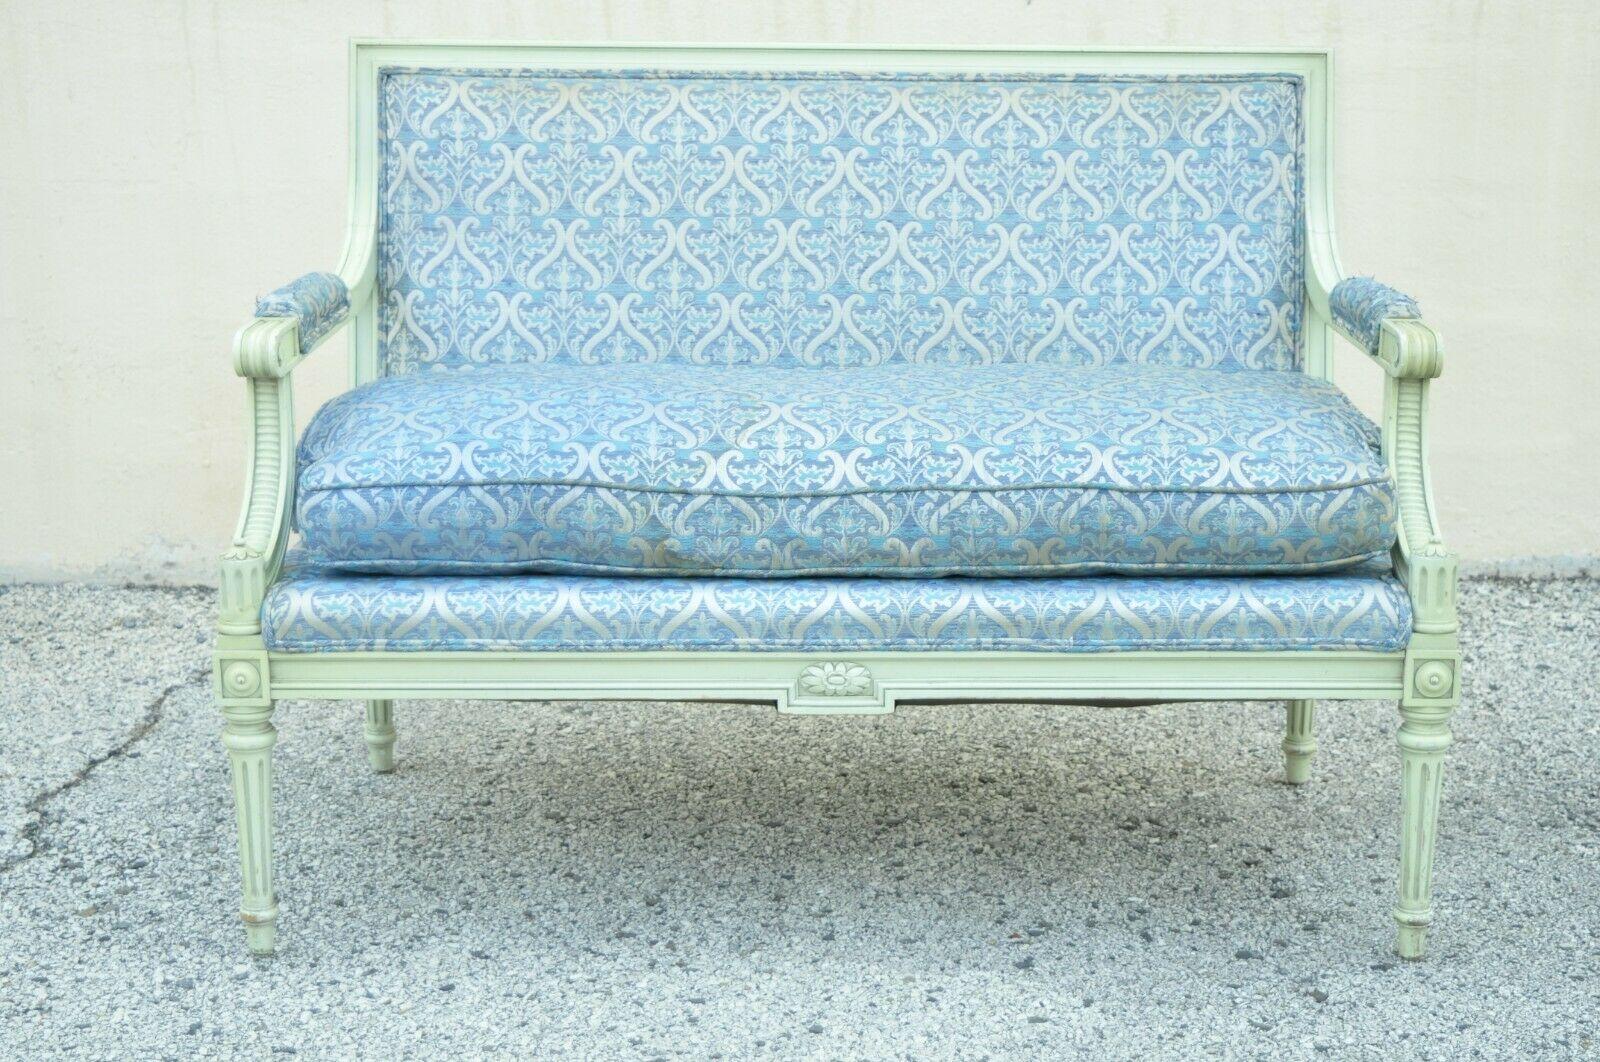 Vintage French Louis XVI style Hollywood Regency green blue painted settee loveseat sofa. Item features green blue distress painted frame, solid wood construction, upholstered arm rests, tapered legs, very nice vintage item, quality craftsmanship,